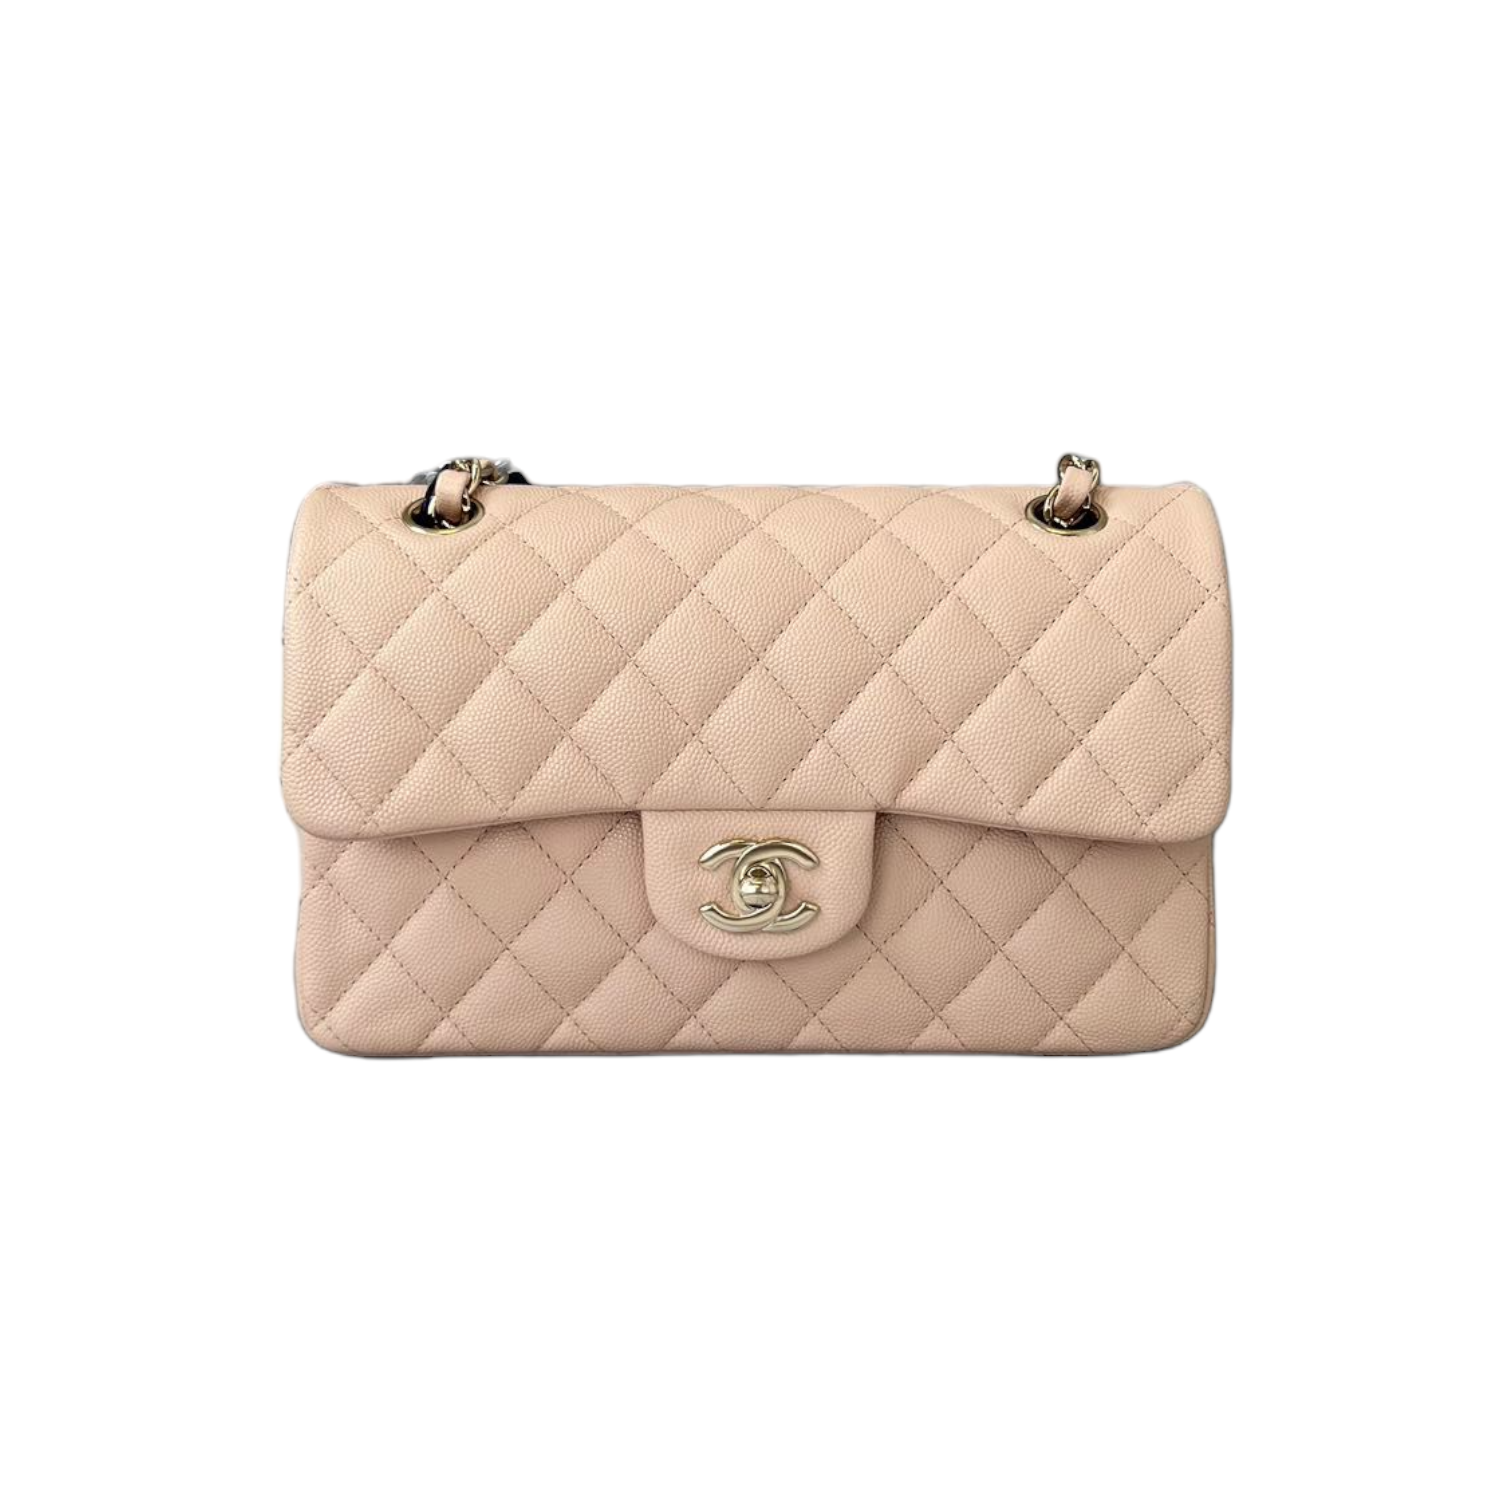 Premier Designer Bags - Chanel - Mini Flaps - Page 1 - Timeless Luxuries